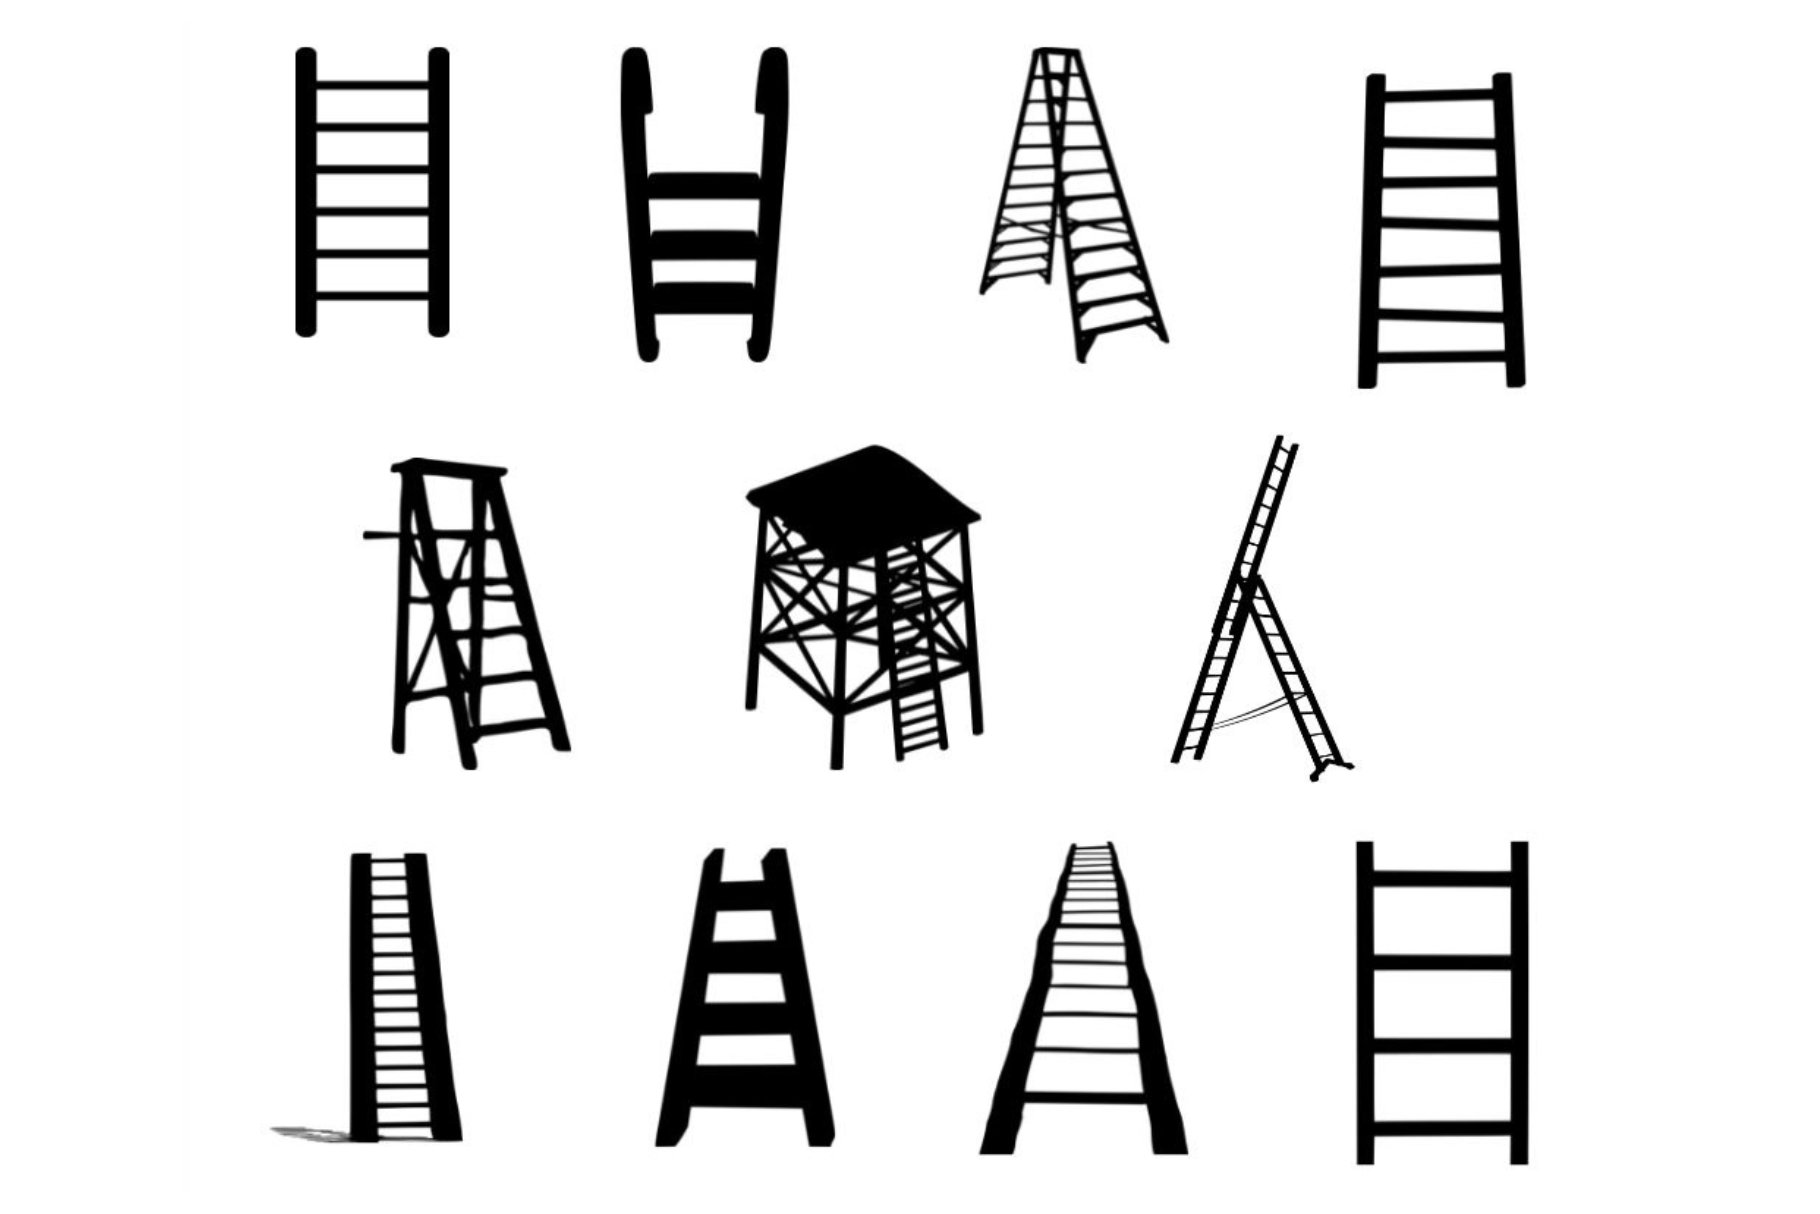 Ladder Silhouette cover image.